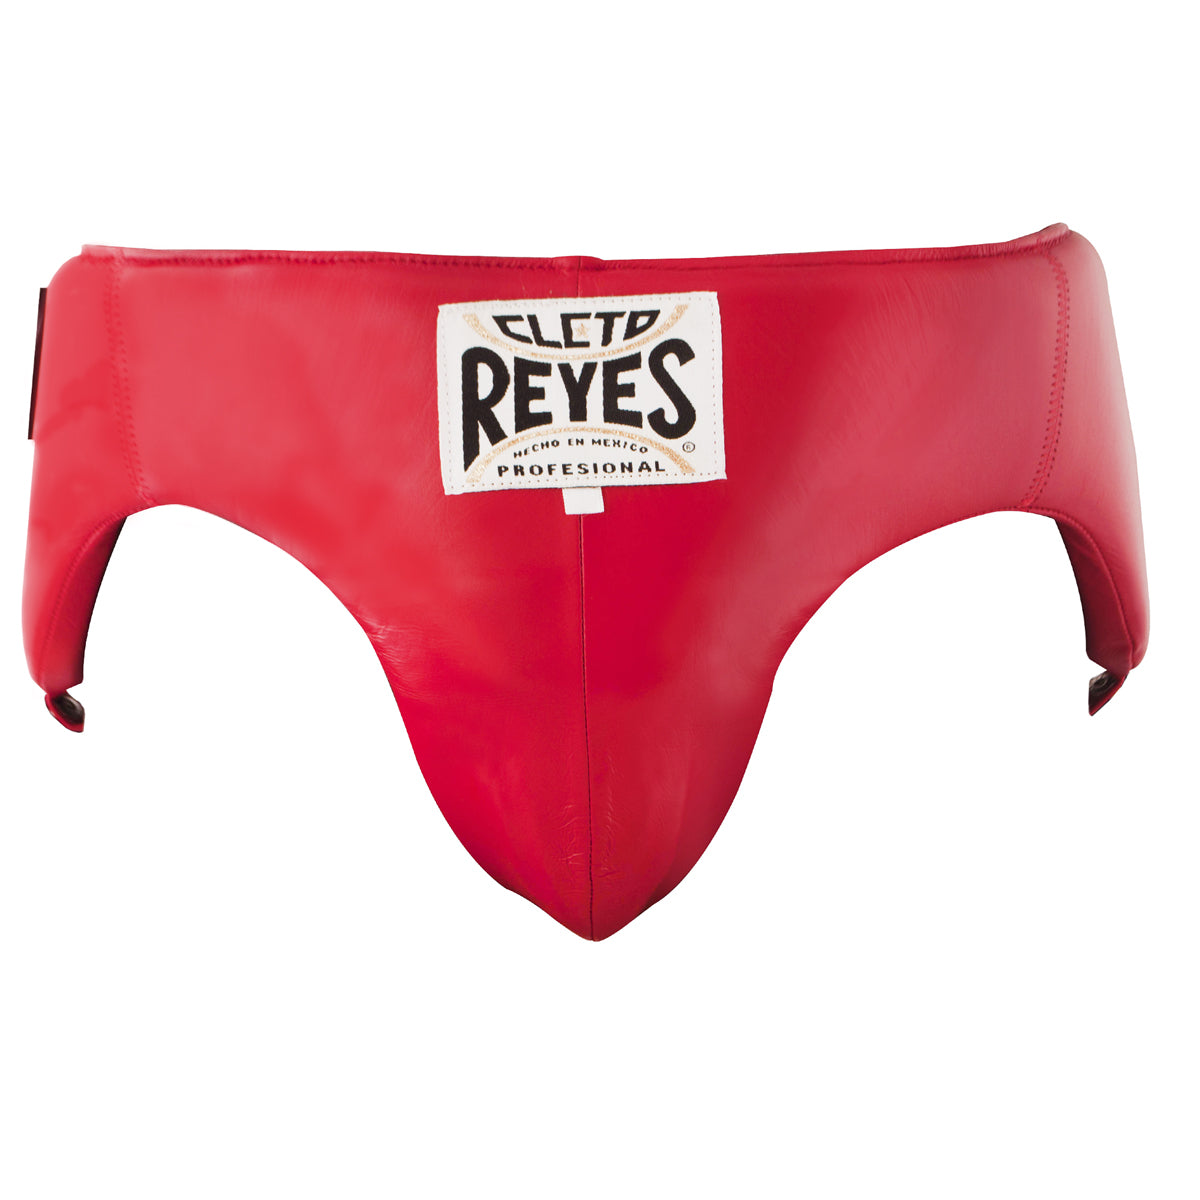 Cleto Reyes Traditional No-Foul Padded Protective Cup - Red Cleto Reyes